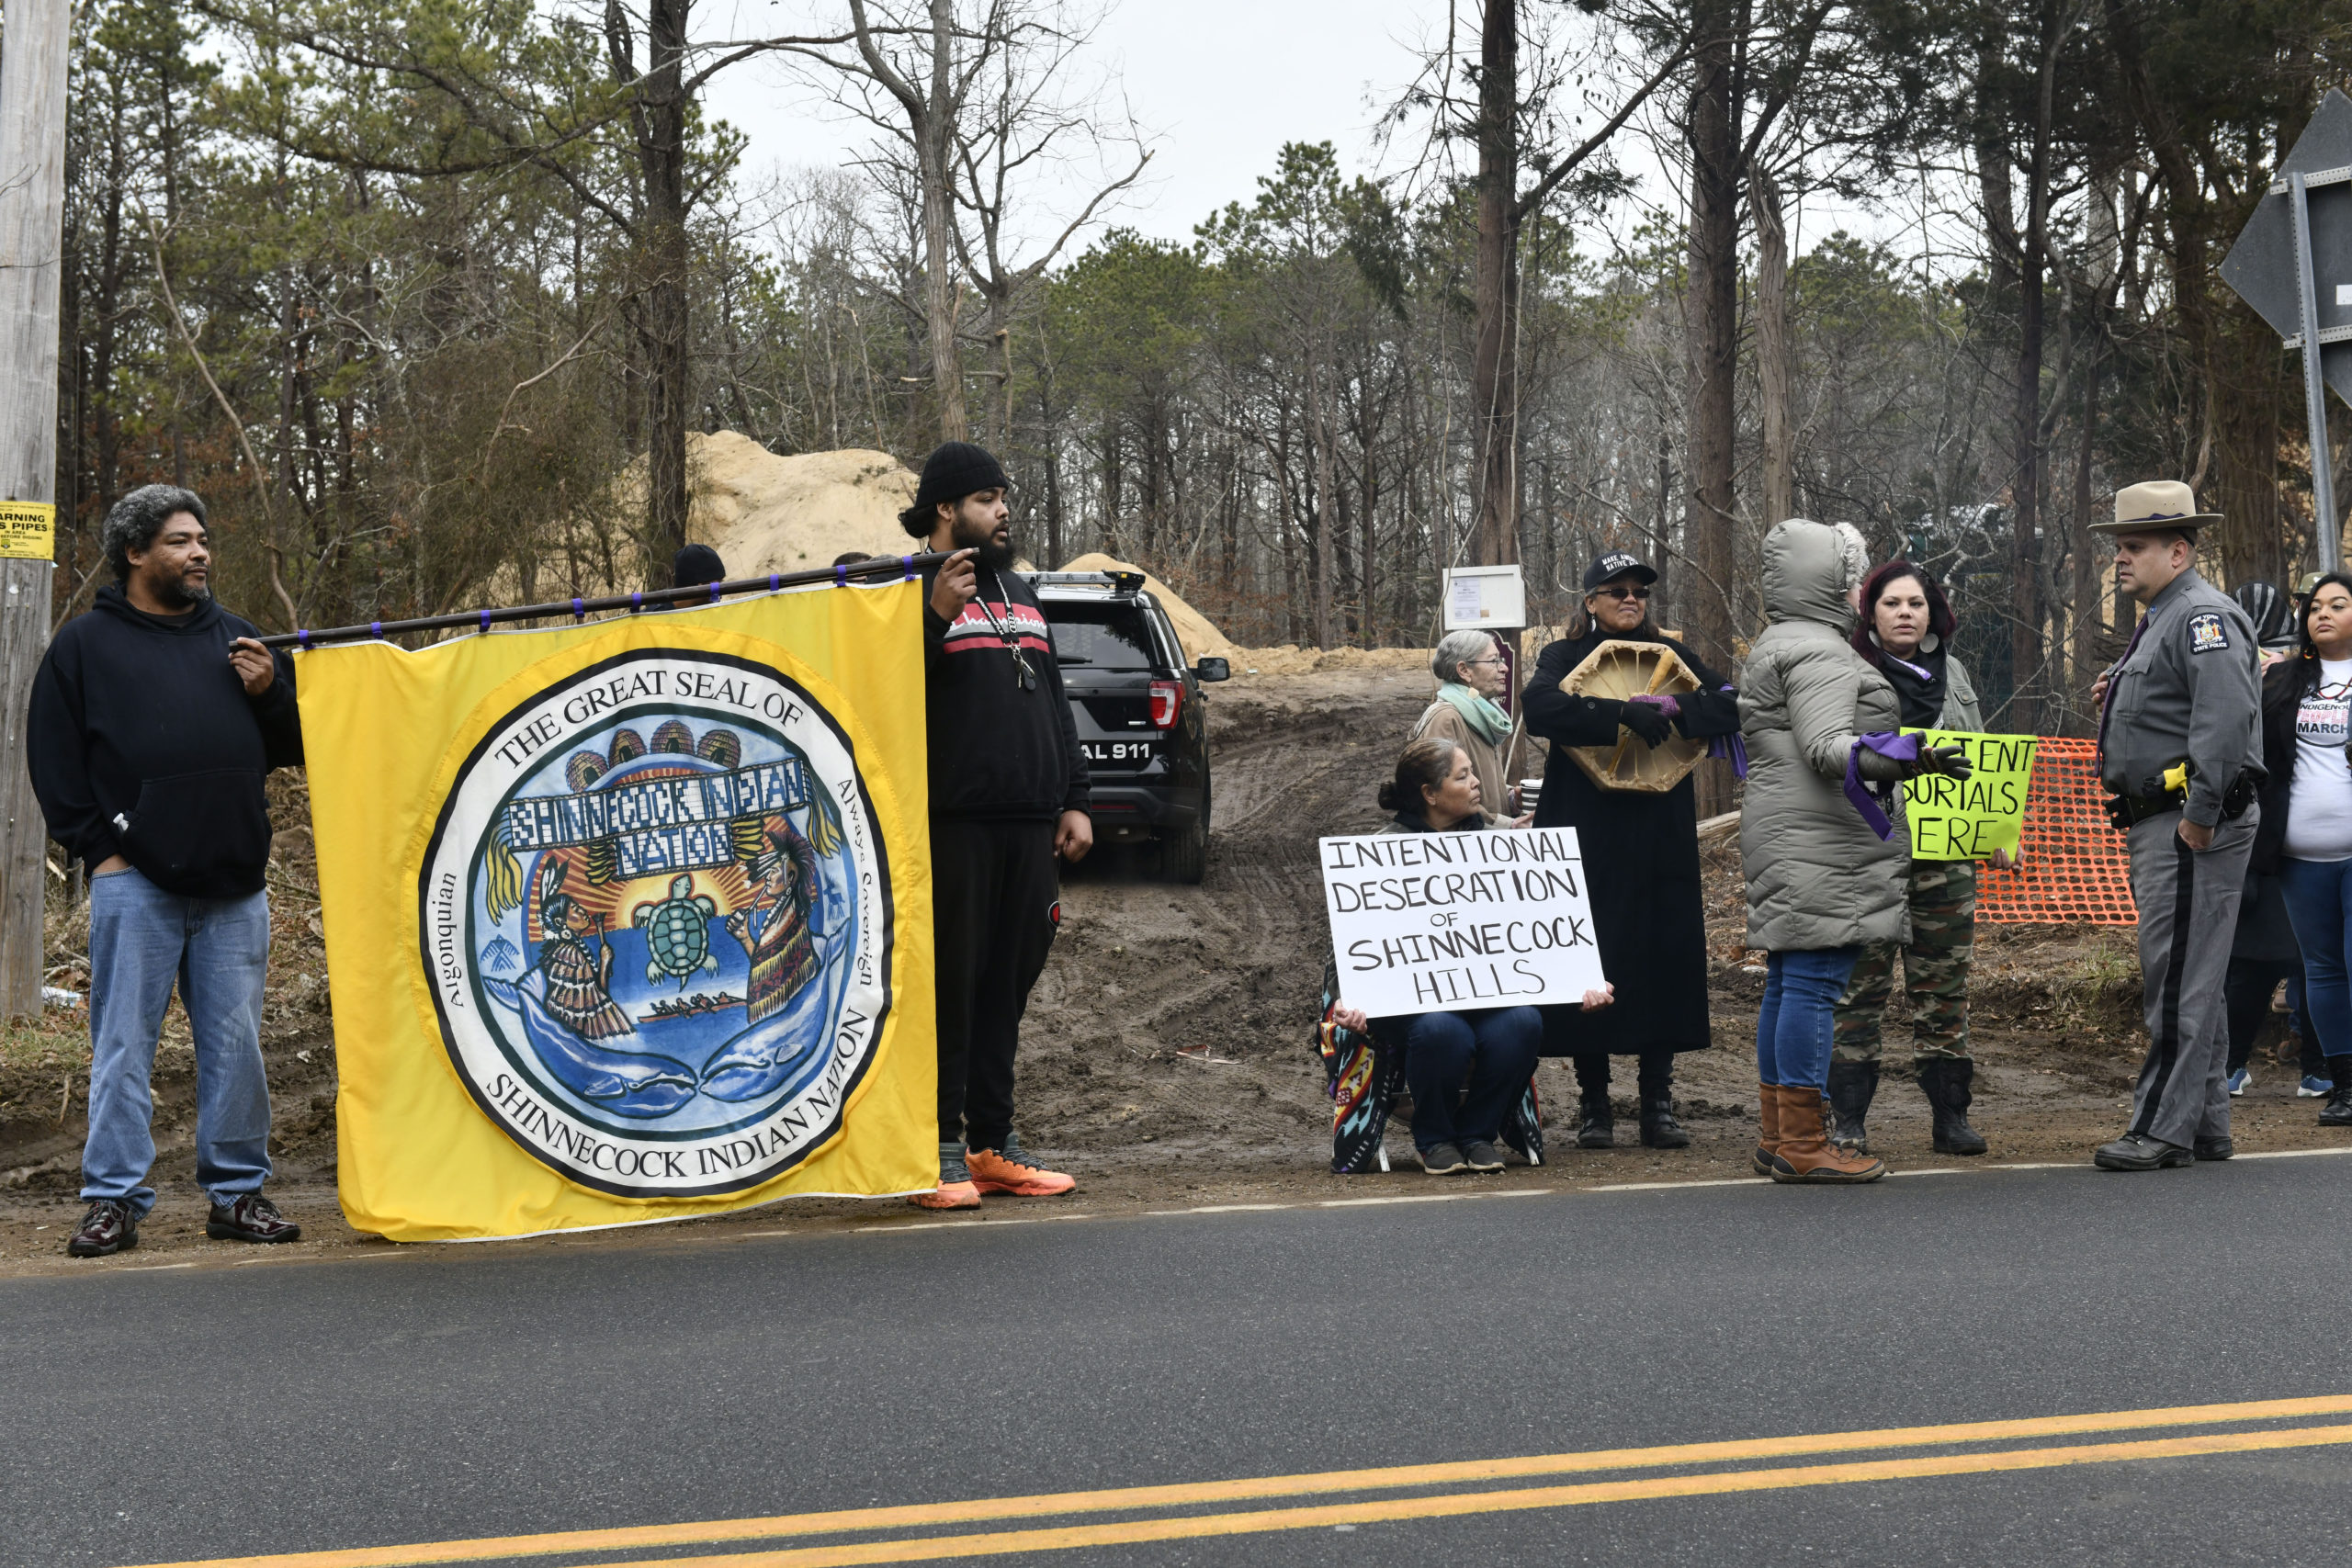 Members of the Shinnecock Nation at a protest at the Sugar Loaf property in Shinnecock Hills on Tuesday, January 14.  DANA SHAW